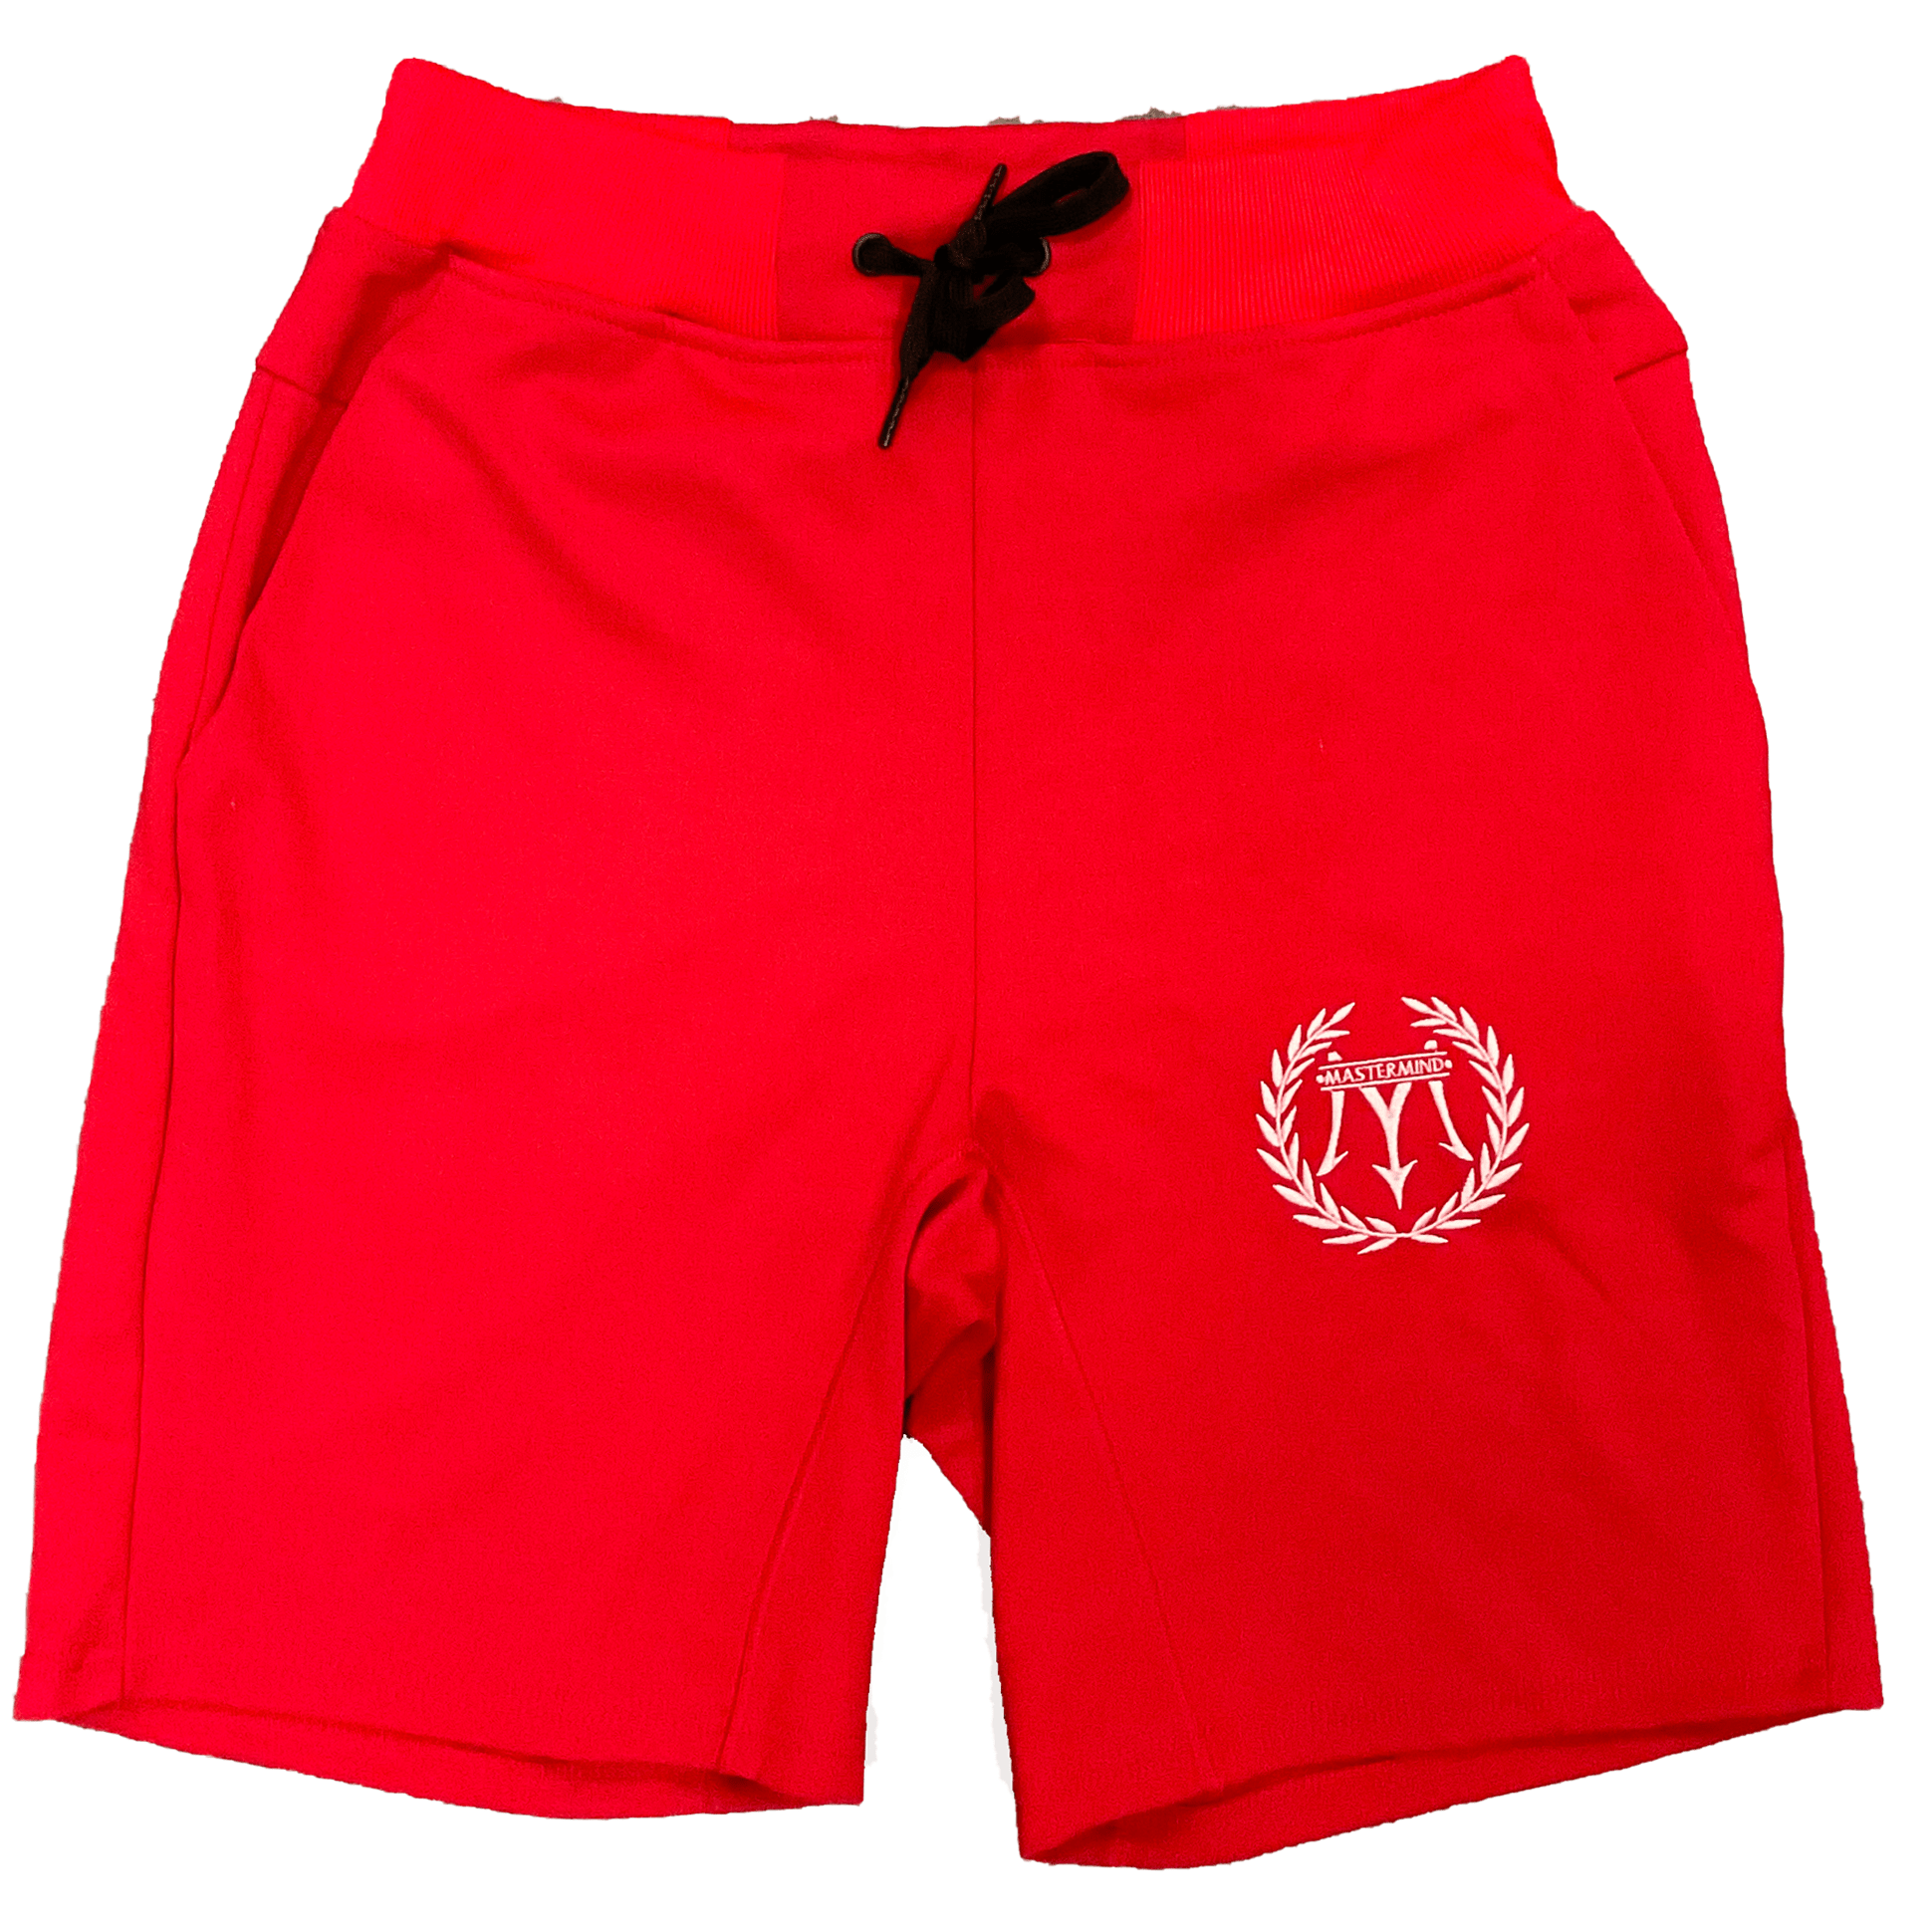 Mastermind315 S Rasby Red Tech Shorts